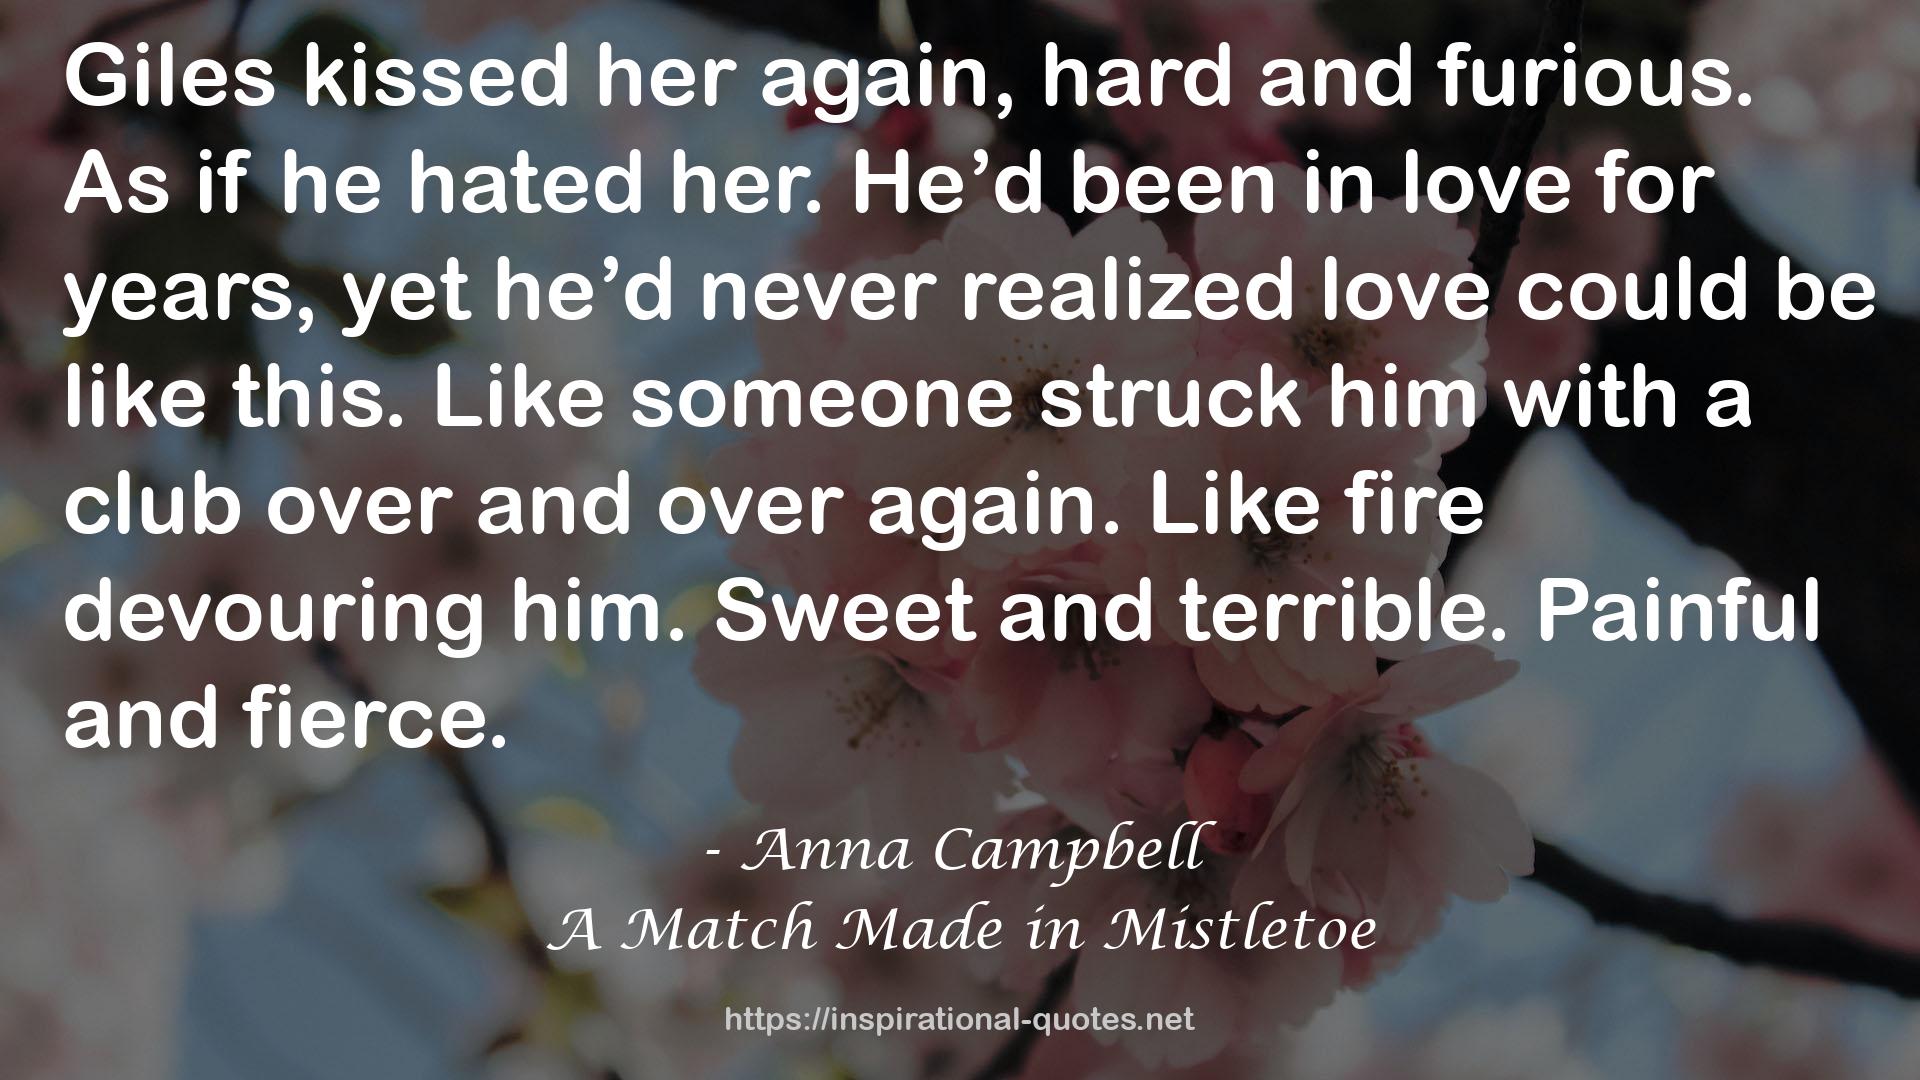 A Match Made in Mistletoe QUOTES